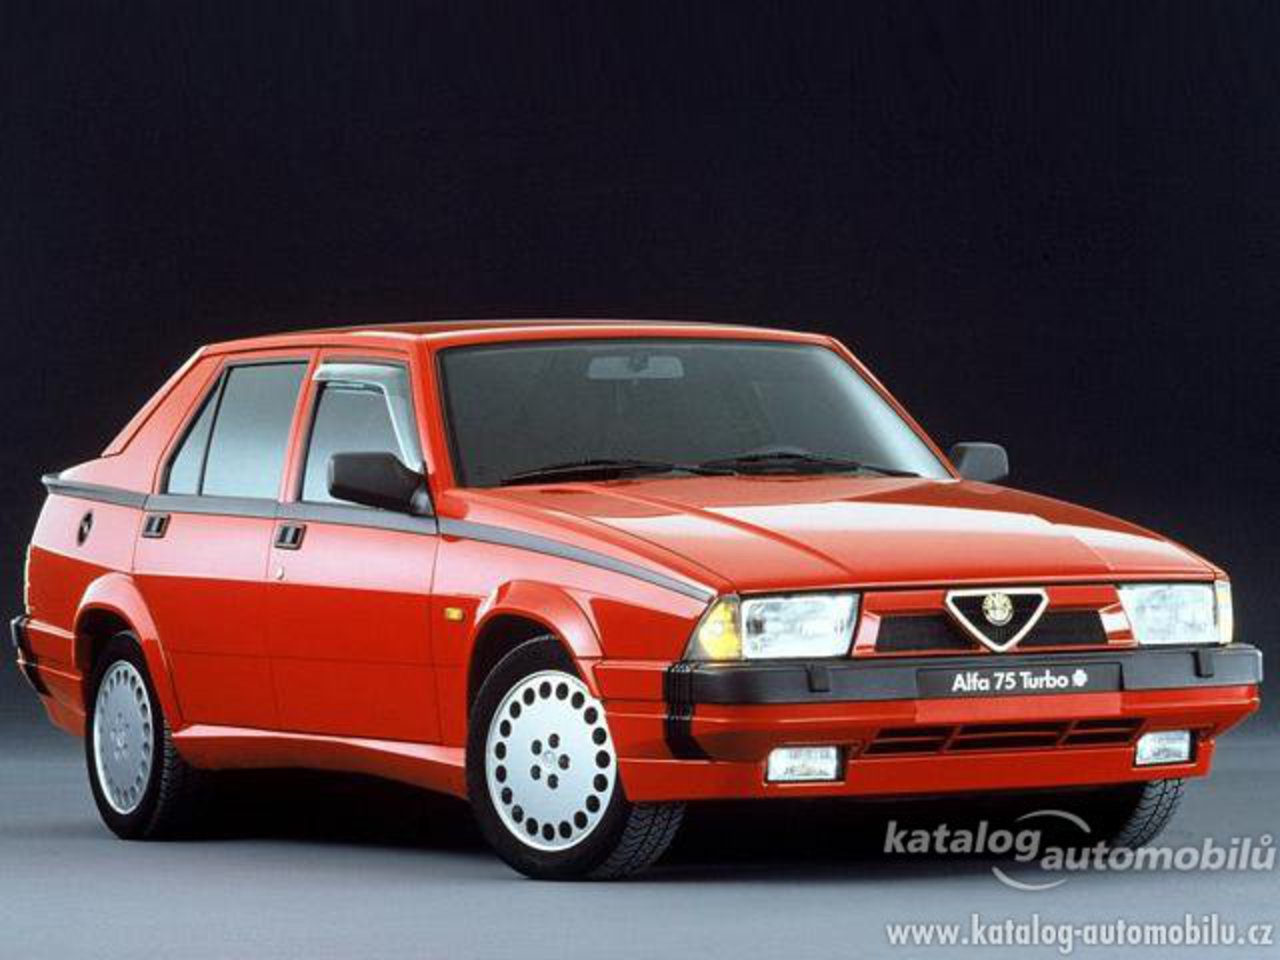 Alfa Romeo 75 Twin Spark 20 photos. < Previous. Link to this page: